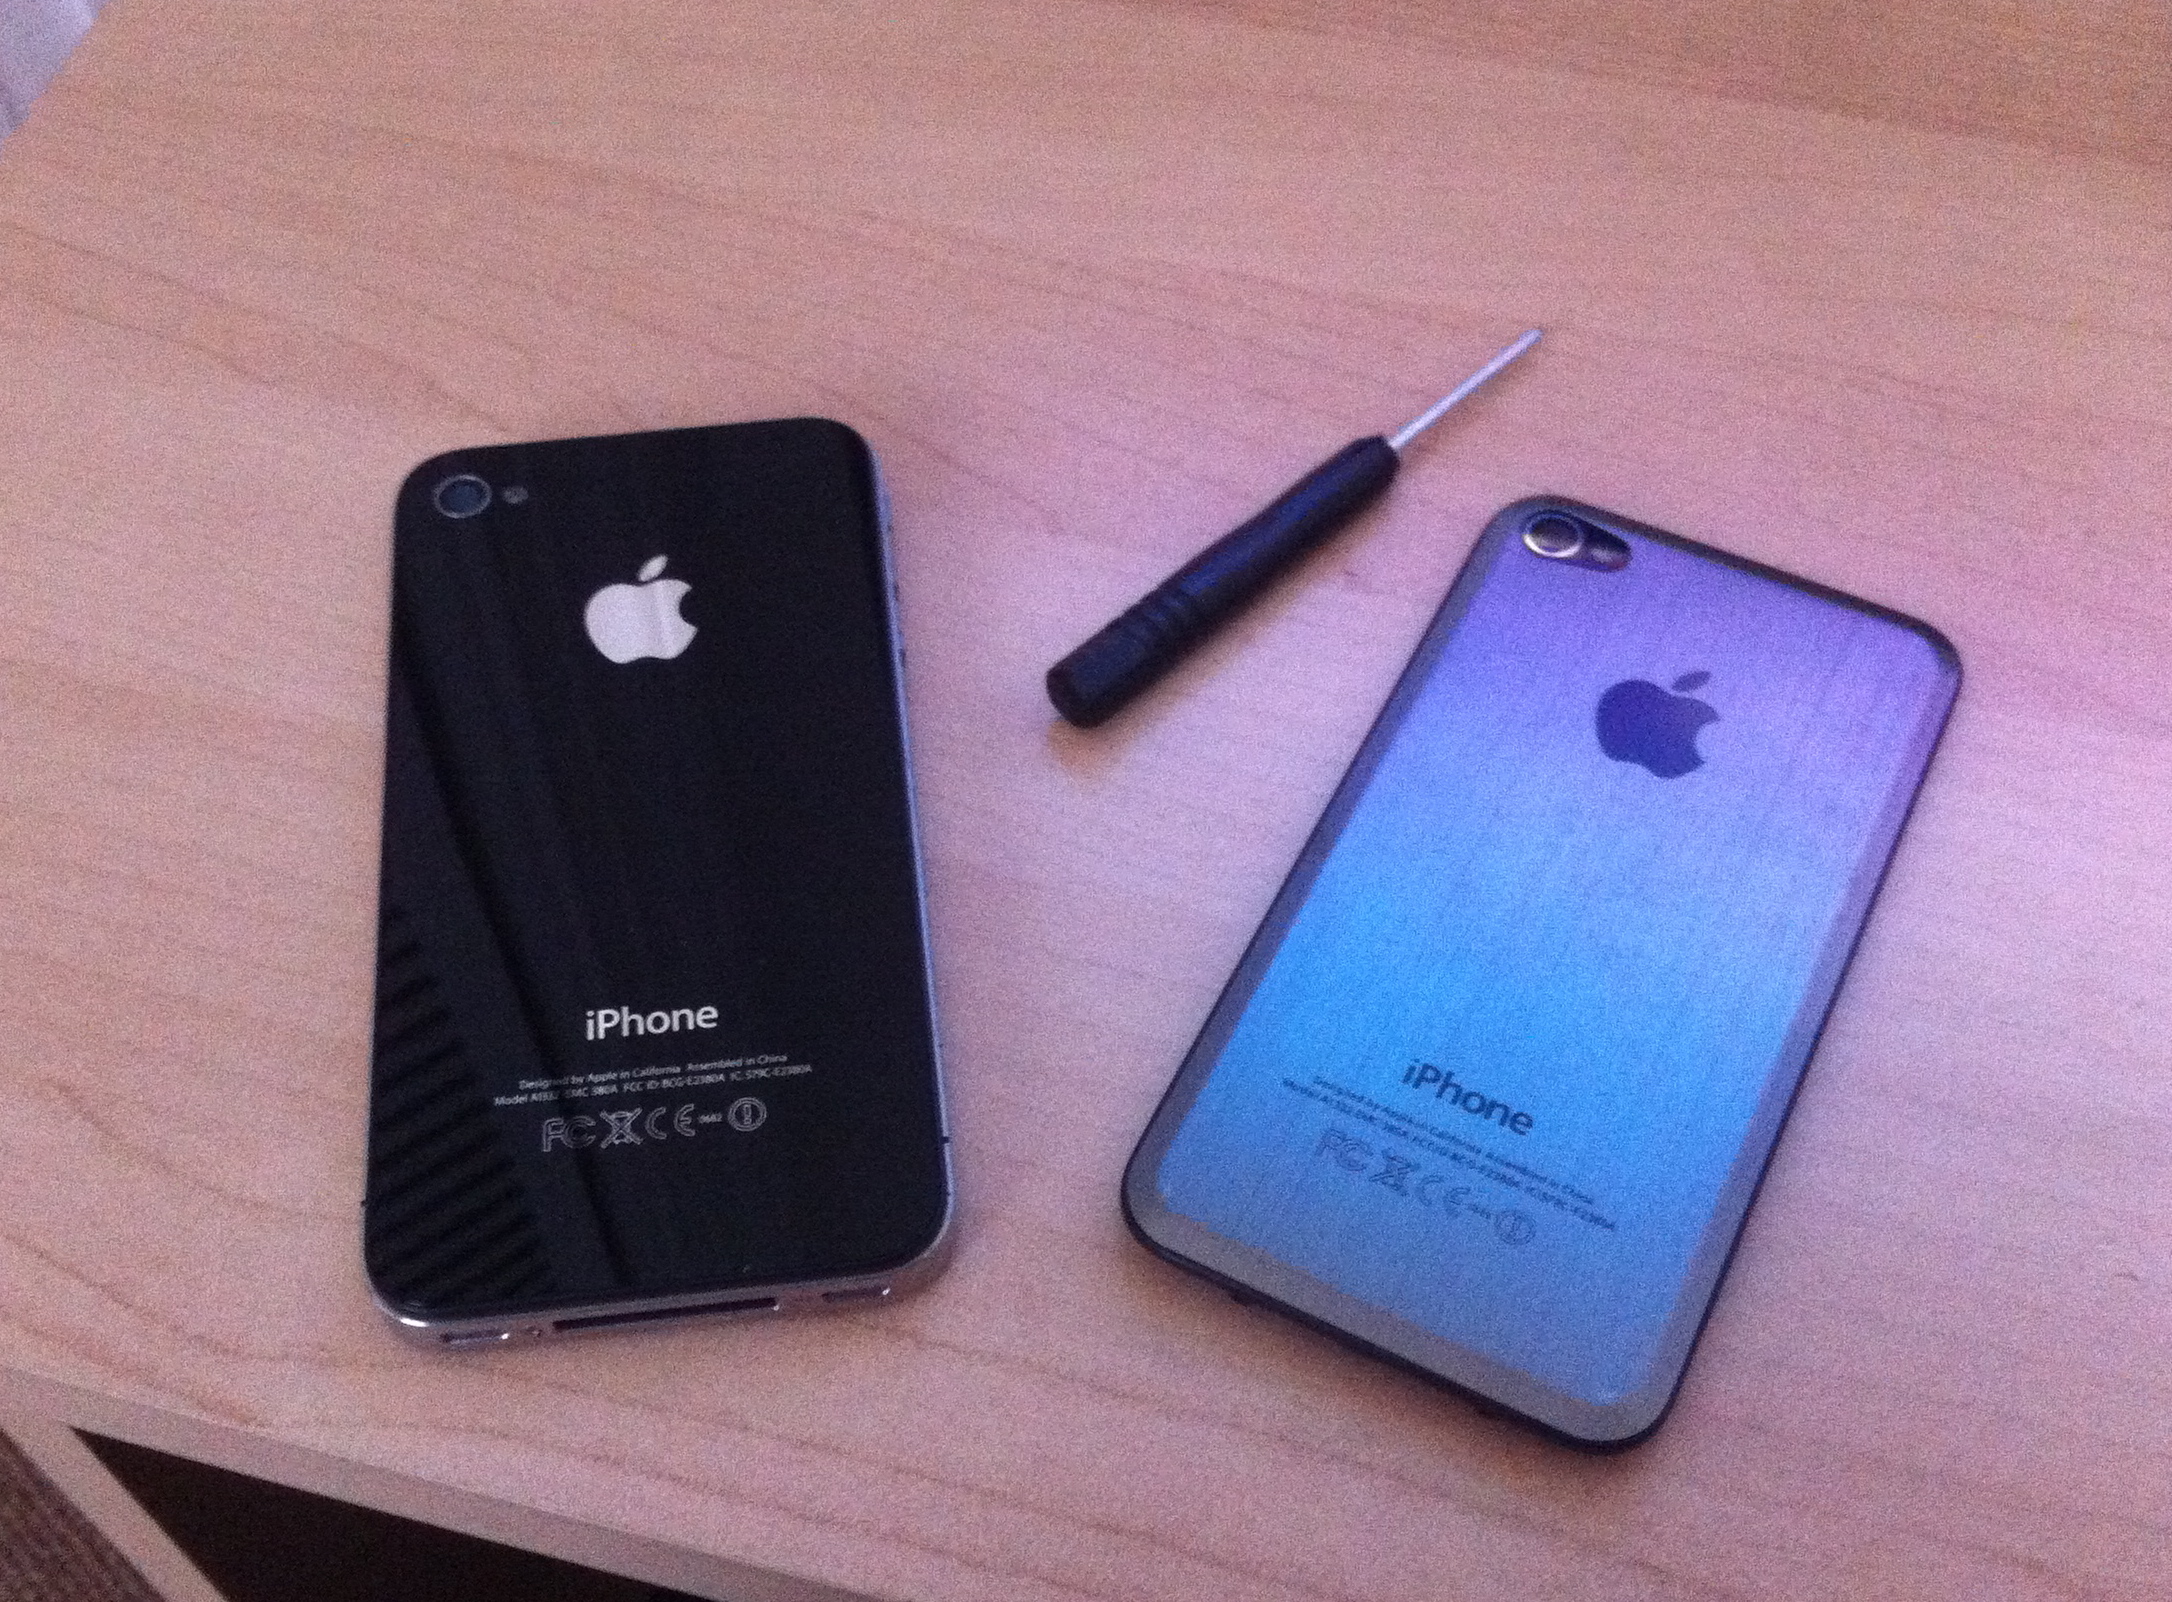 DIY: How to replace the back casing on an iPhone 4